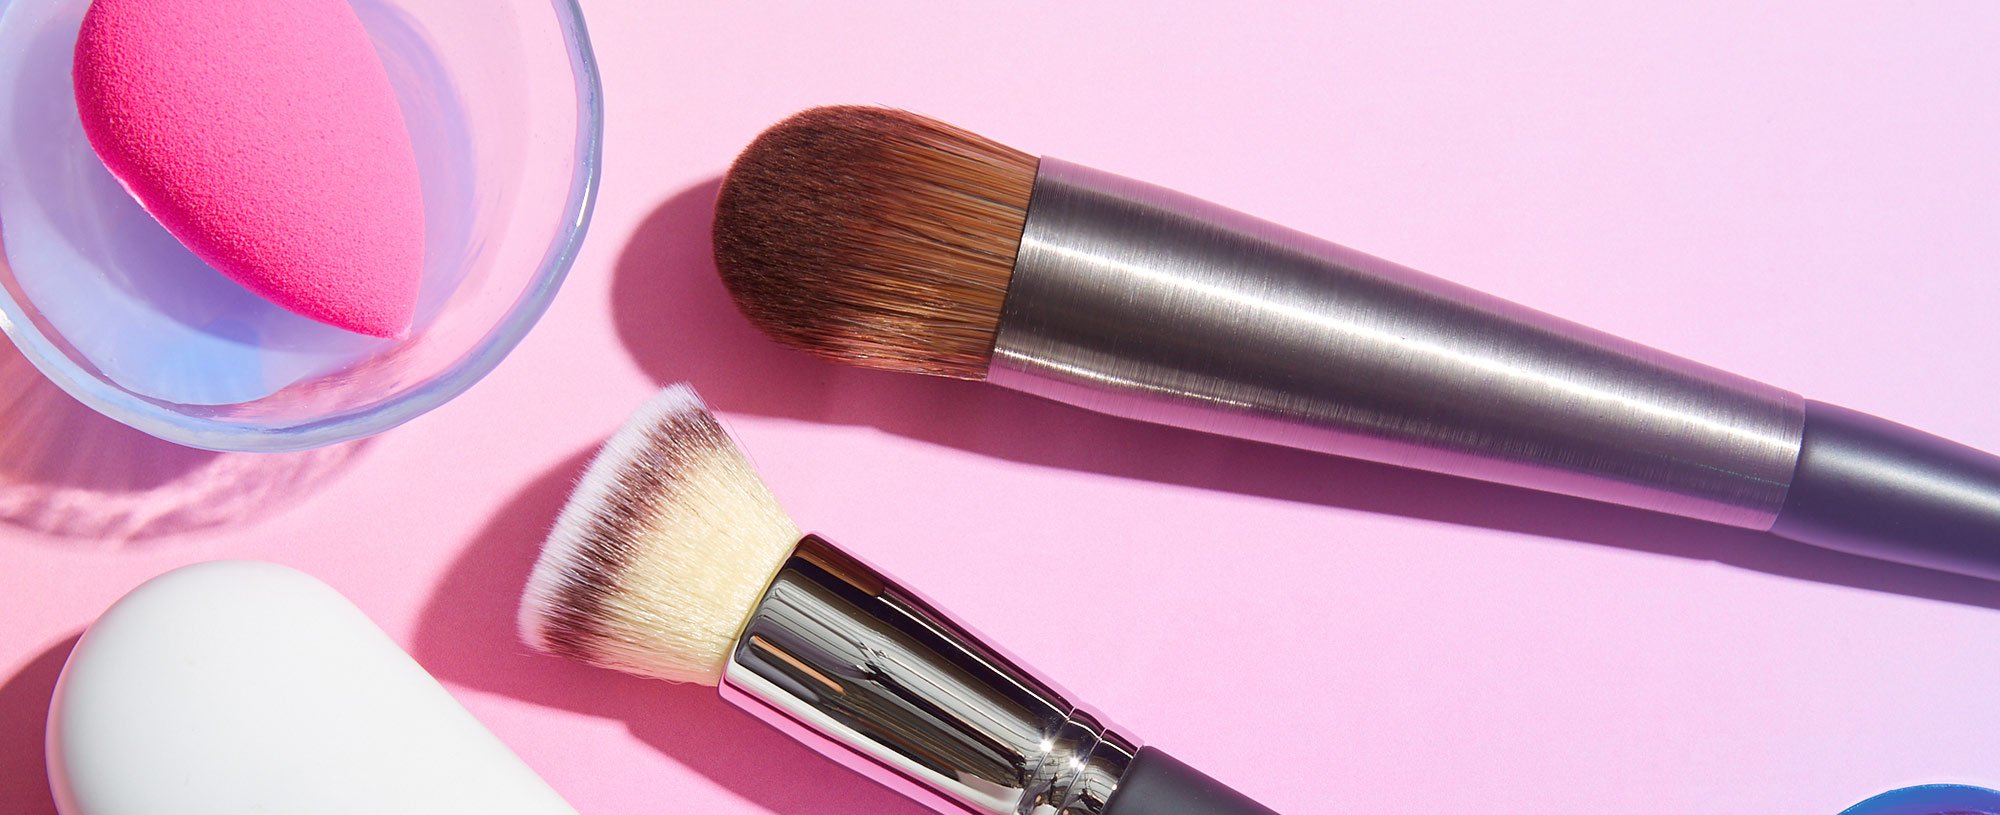 How To Clean Makeup Brushes And Sponges